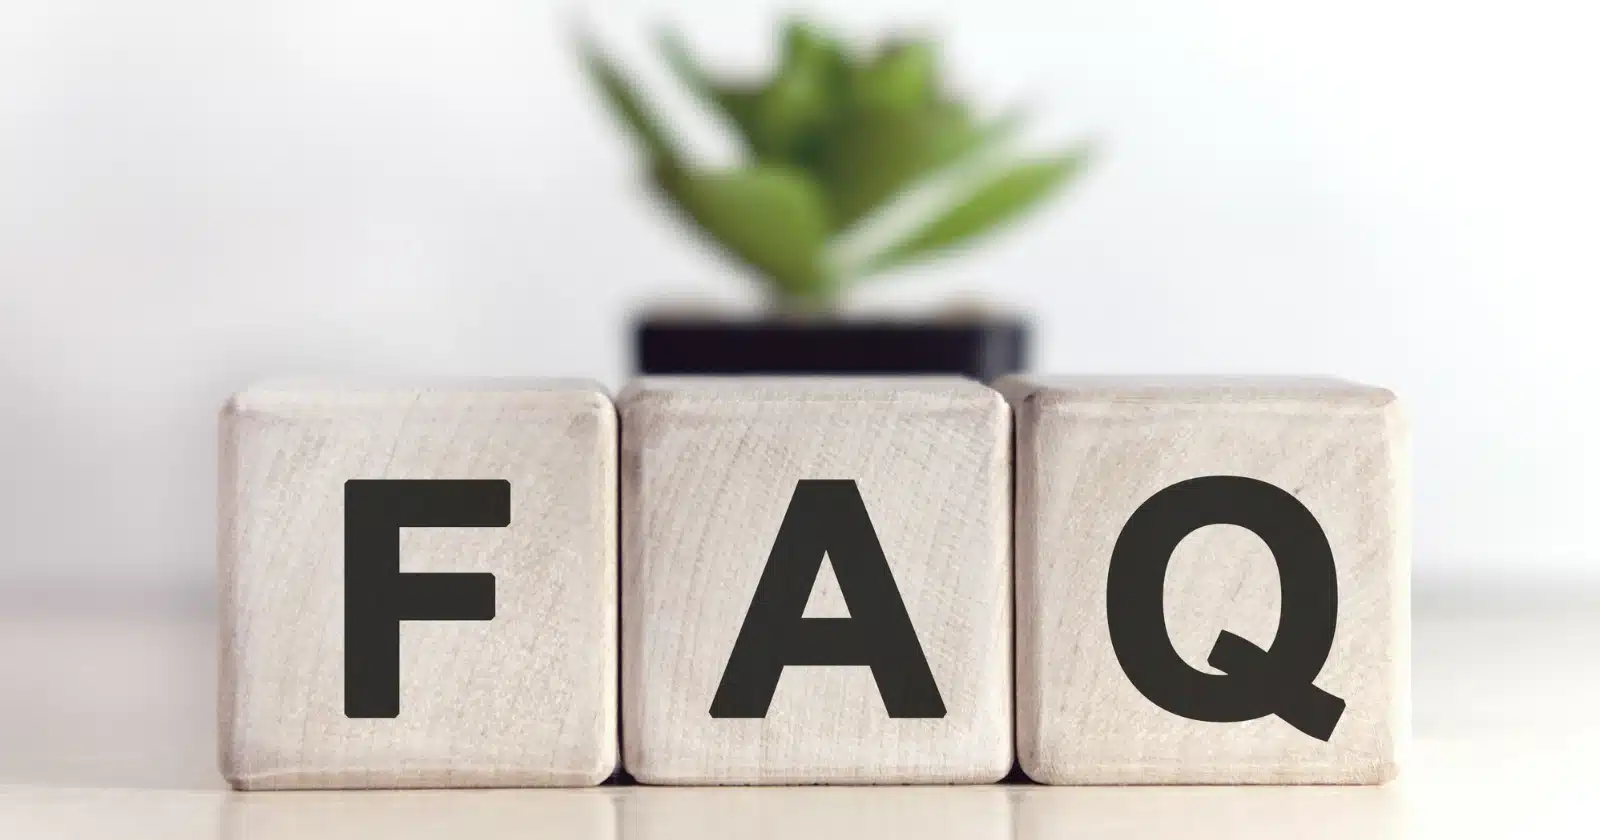 Wooden blocks that read "FAQ" with succulent in the background